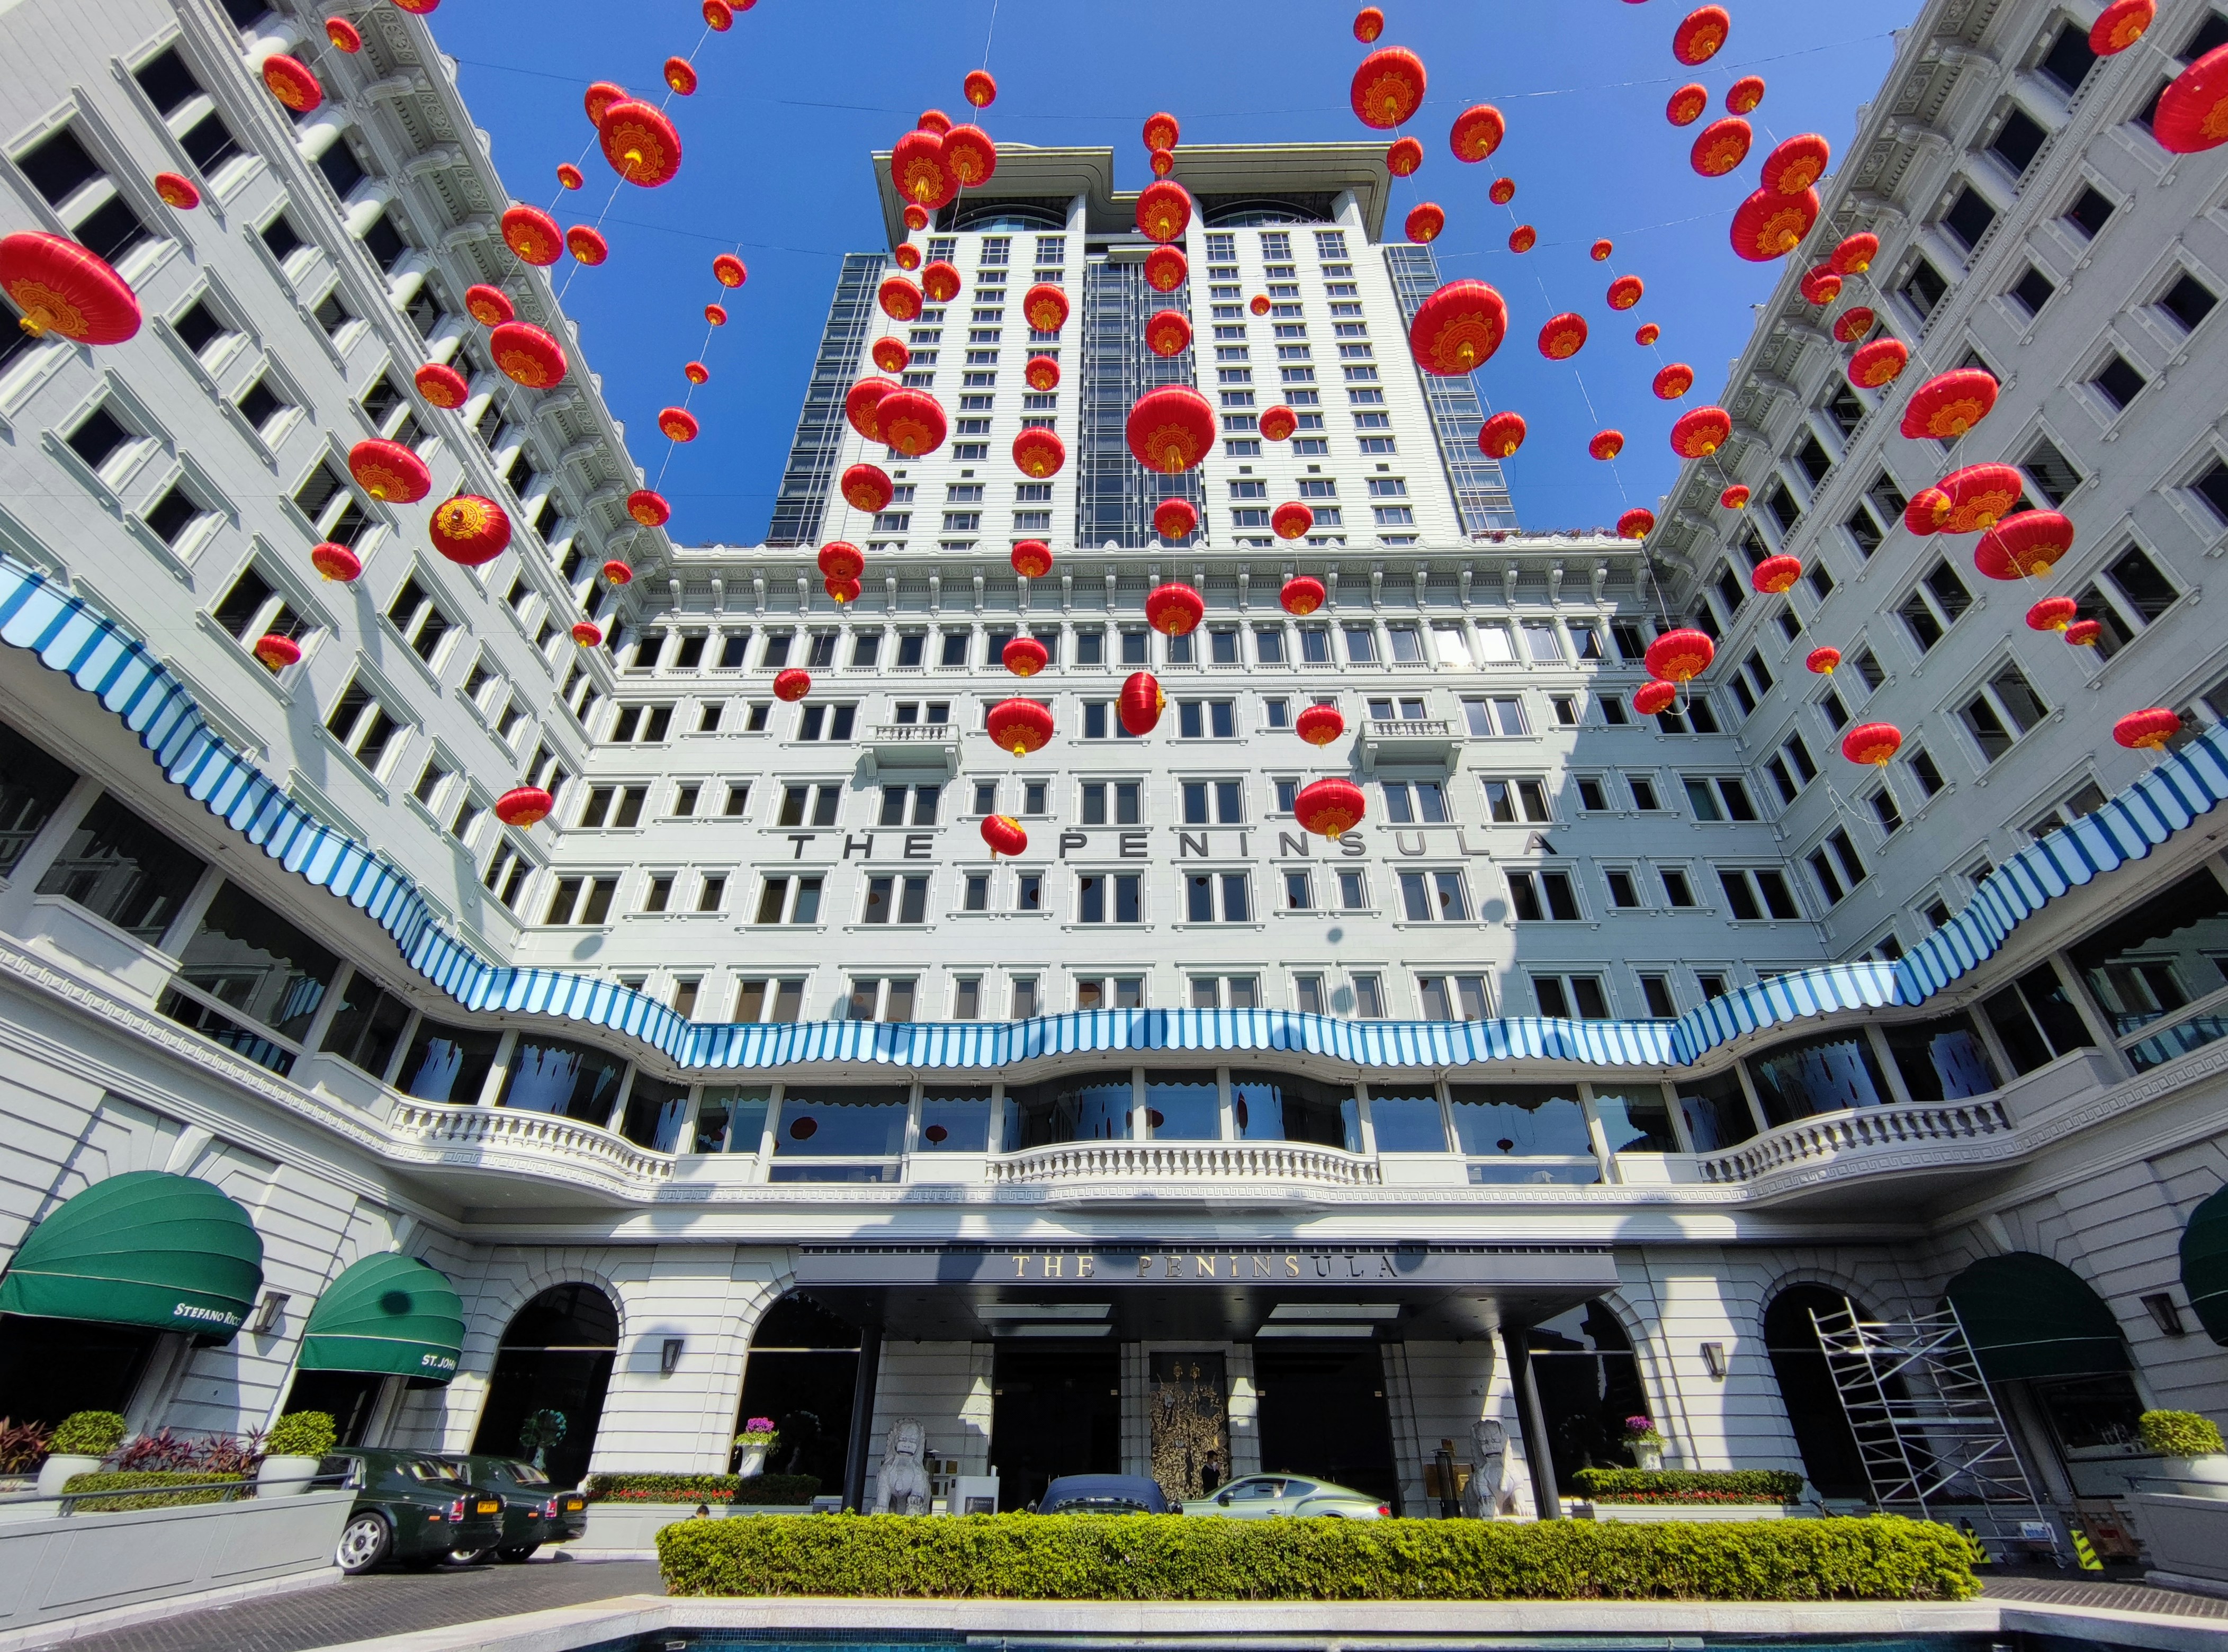 Red lanterns 'floating' in the air outside the Peninsula Hotel on Salisbury Road in Tsim Sha Tsui, Kowloon Peninsula. Red lanterns are hung for celebration or festival activities as a common practice in traditional Chinese culture. The lanterns are hung up by wires. The Peninsula Hotel, opened in 1928 before the Second World War and expanded in 1994, has a Baroque architectural design （巴洛克建築風格）. It is a touristic place and landmark in Tsim Sha Tsui and id one of the most luxurious and iconic hotel in Hong Kong.